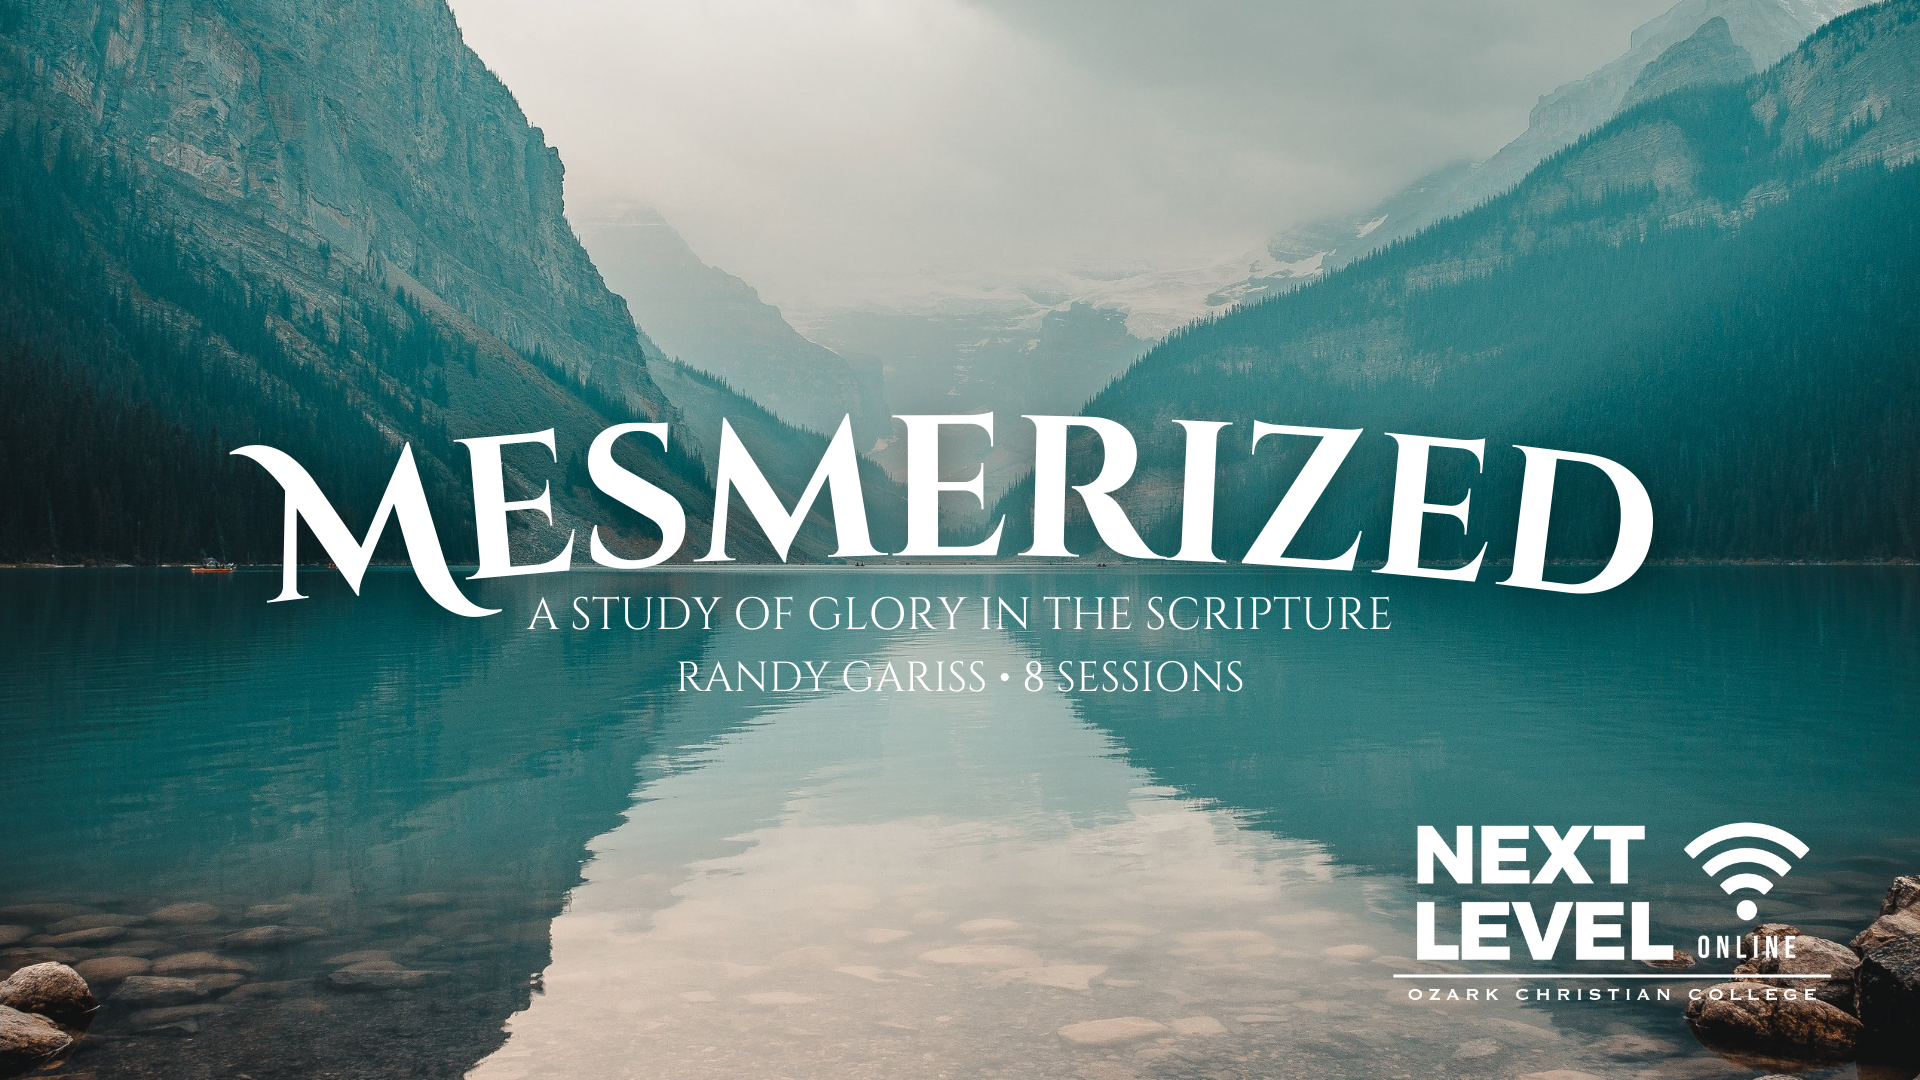 Mesmerized: A Study of Glory in the Scripture